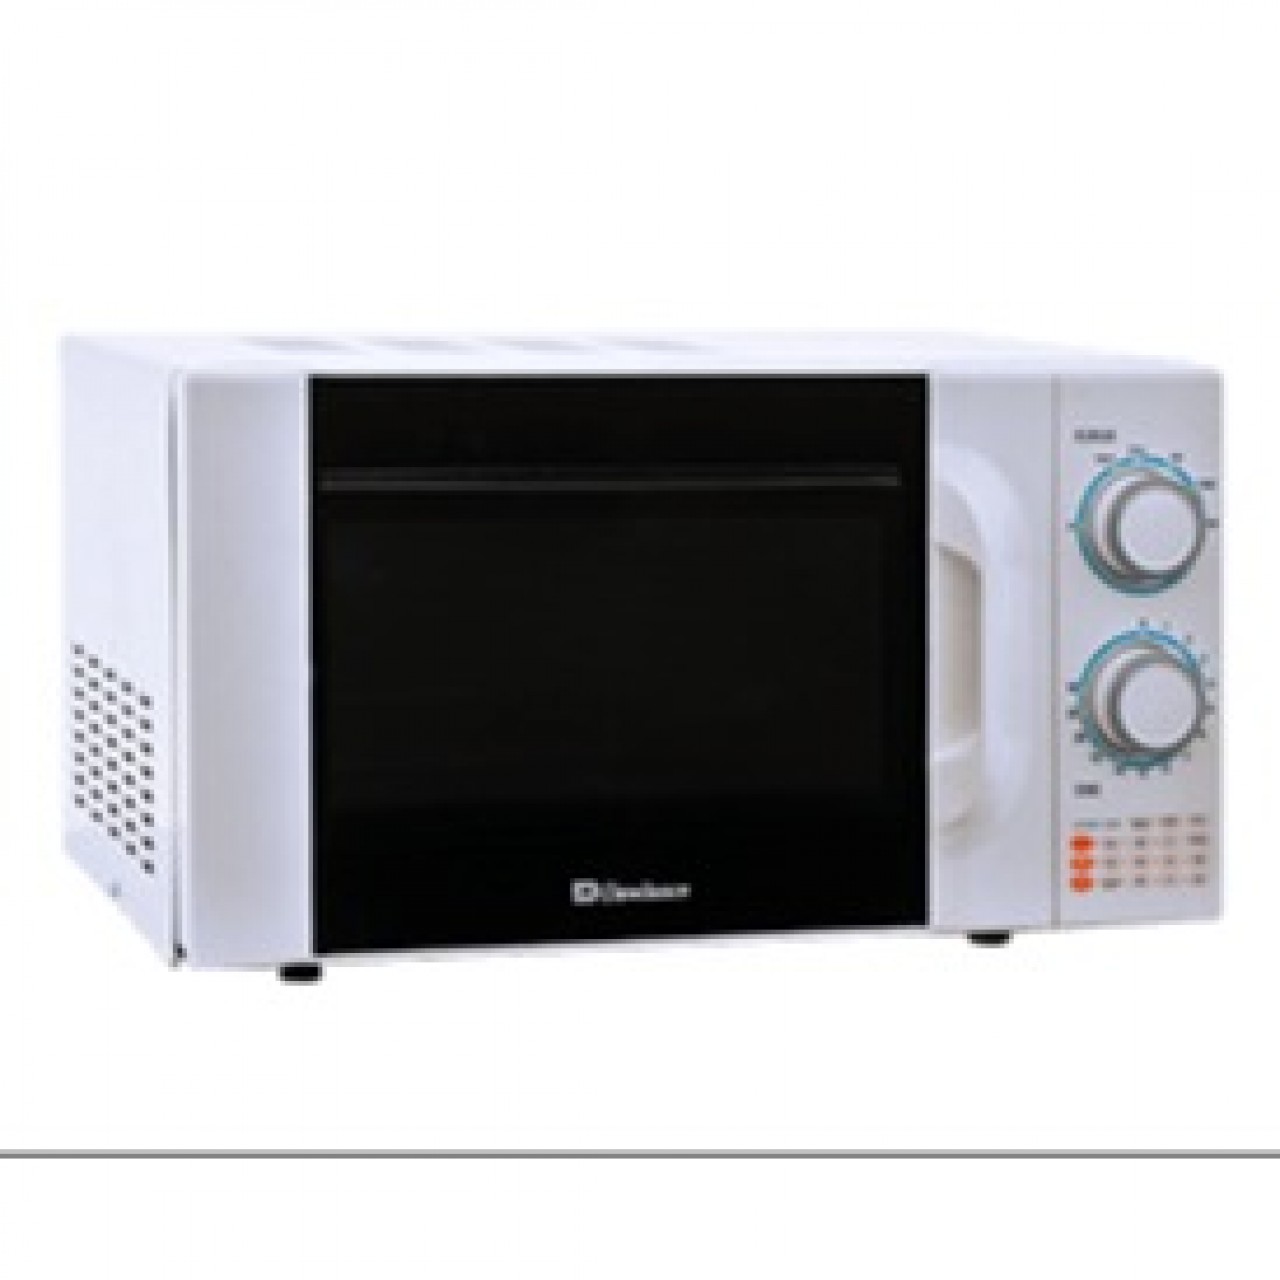 Dawlance Microwave Oven DW MD4 N - Capacity 20 Litters